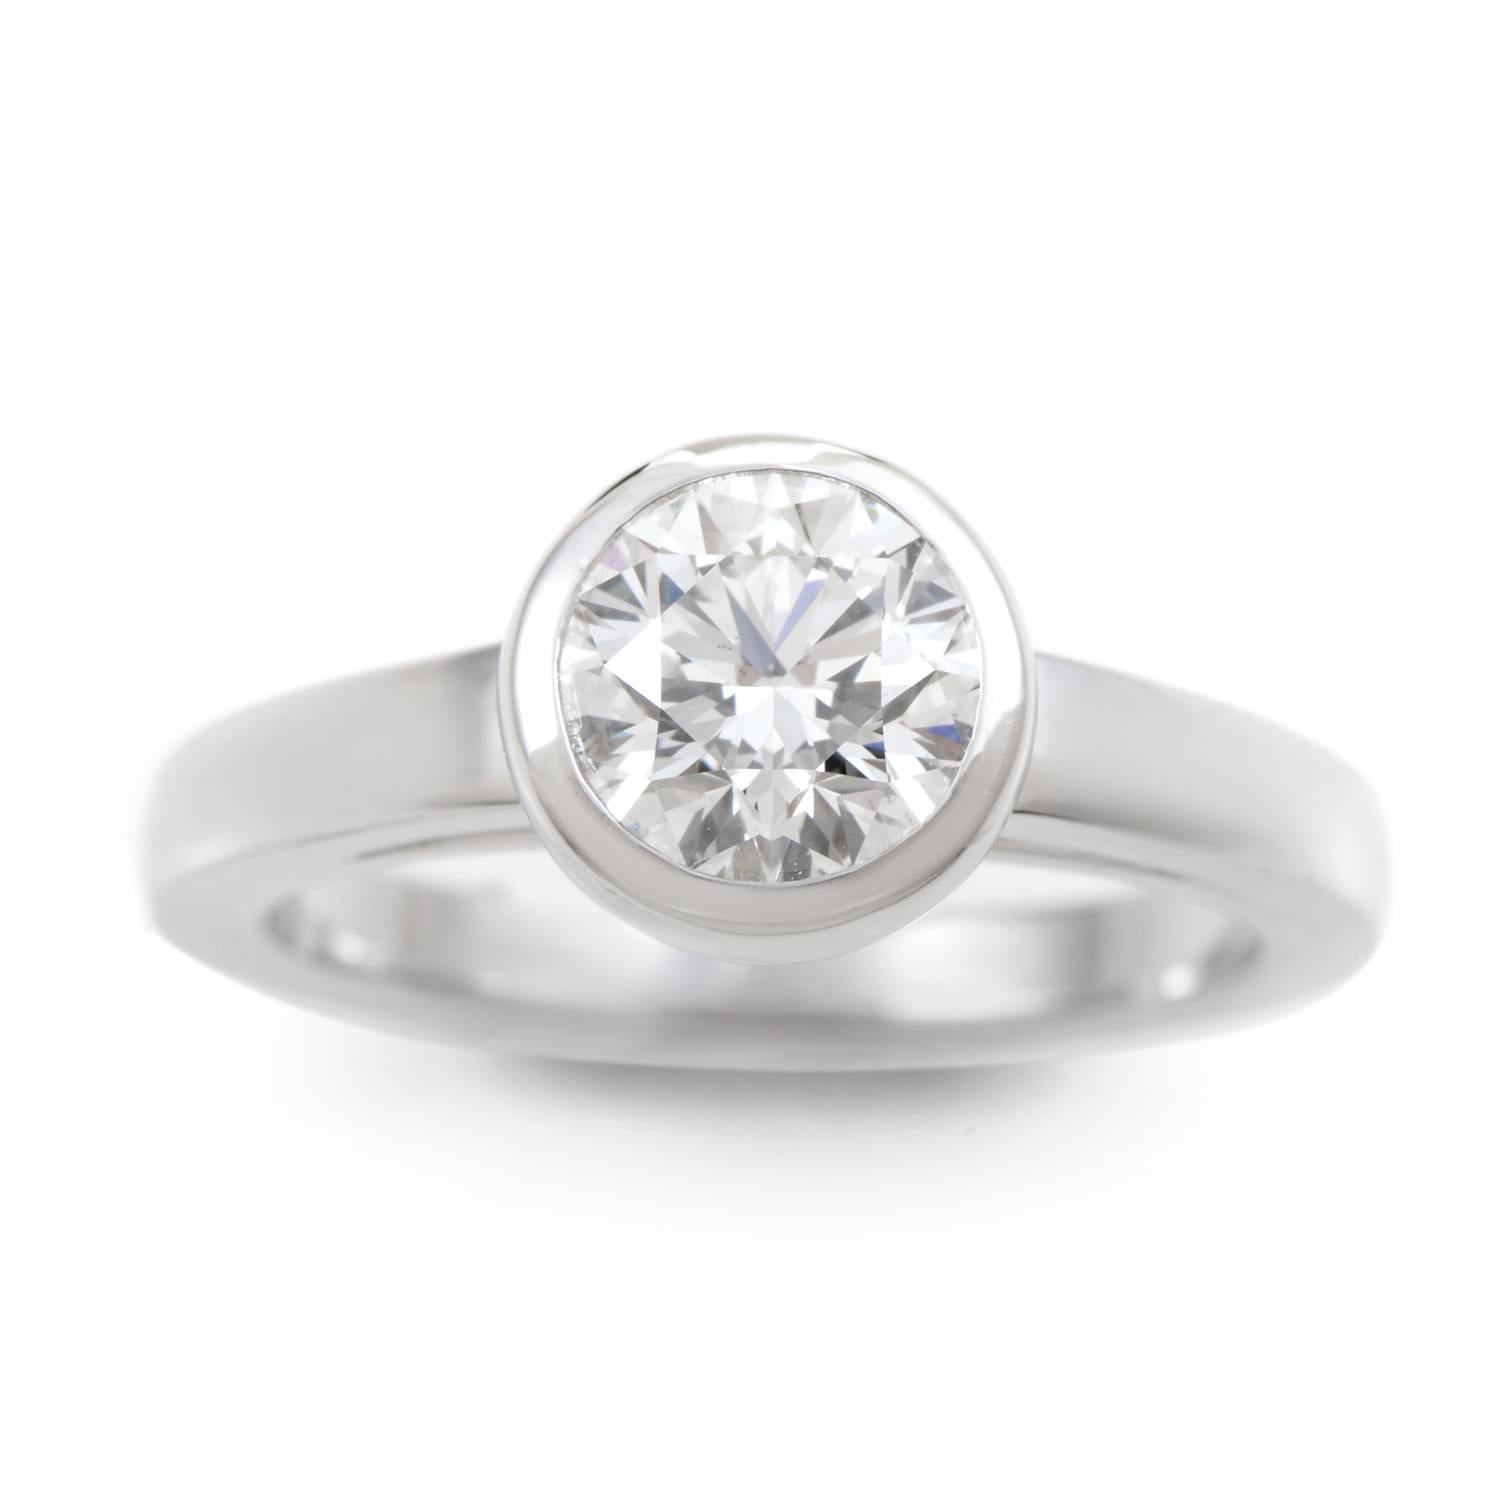 There's nothing minimal about this magnificent engagement ring from Cartier. On the unquestionable strength of a single 1.05ct three time cut diamond solitaire, this glittering beauty exudes luxury from every angle. Giving regal support to this